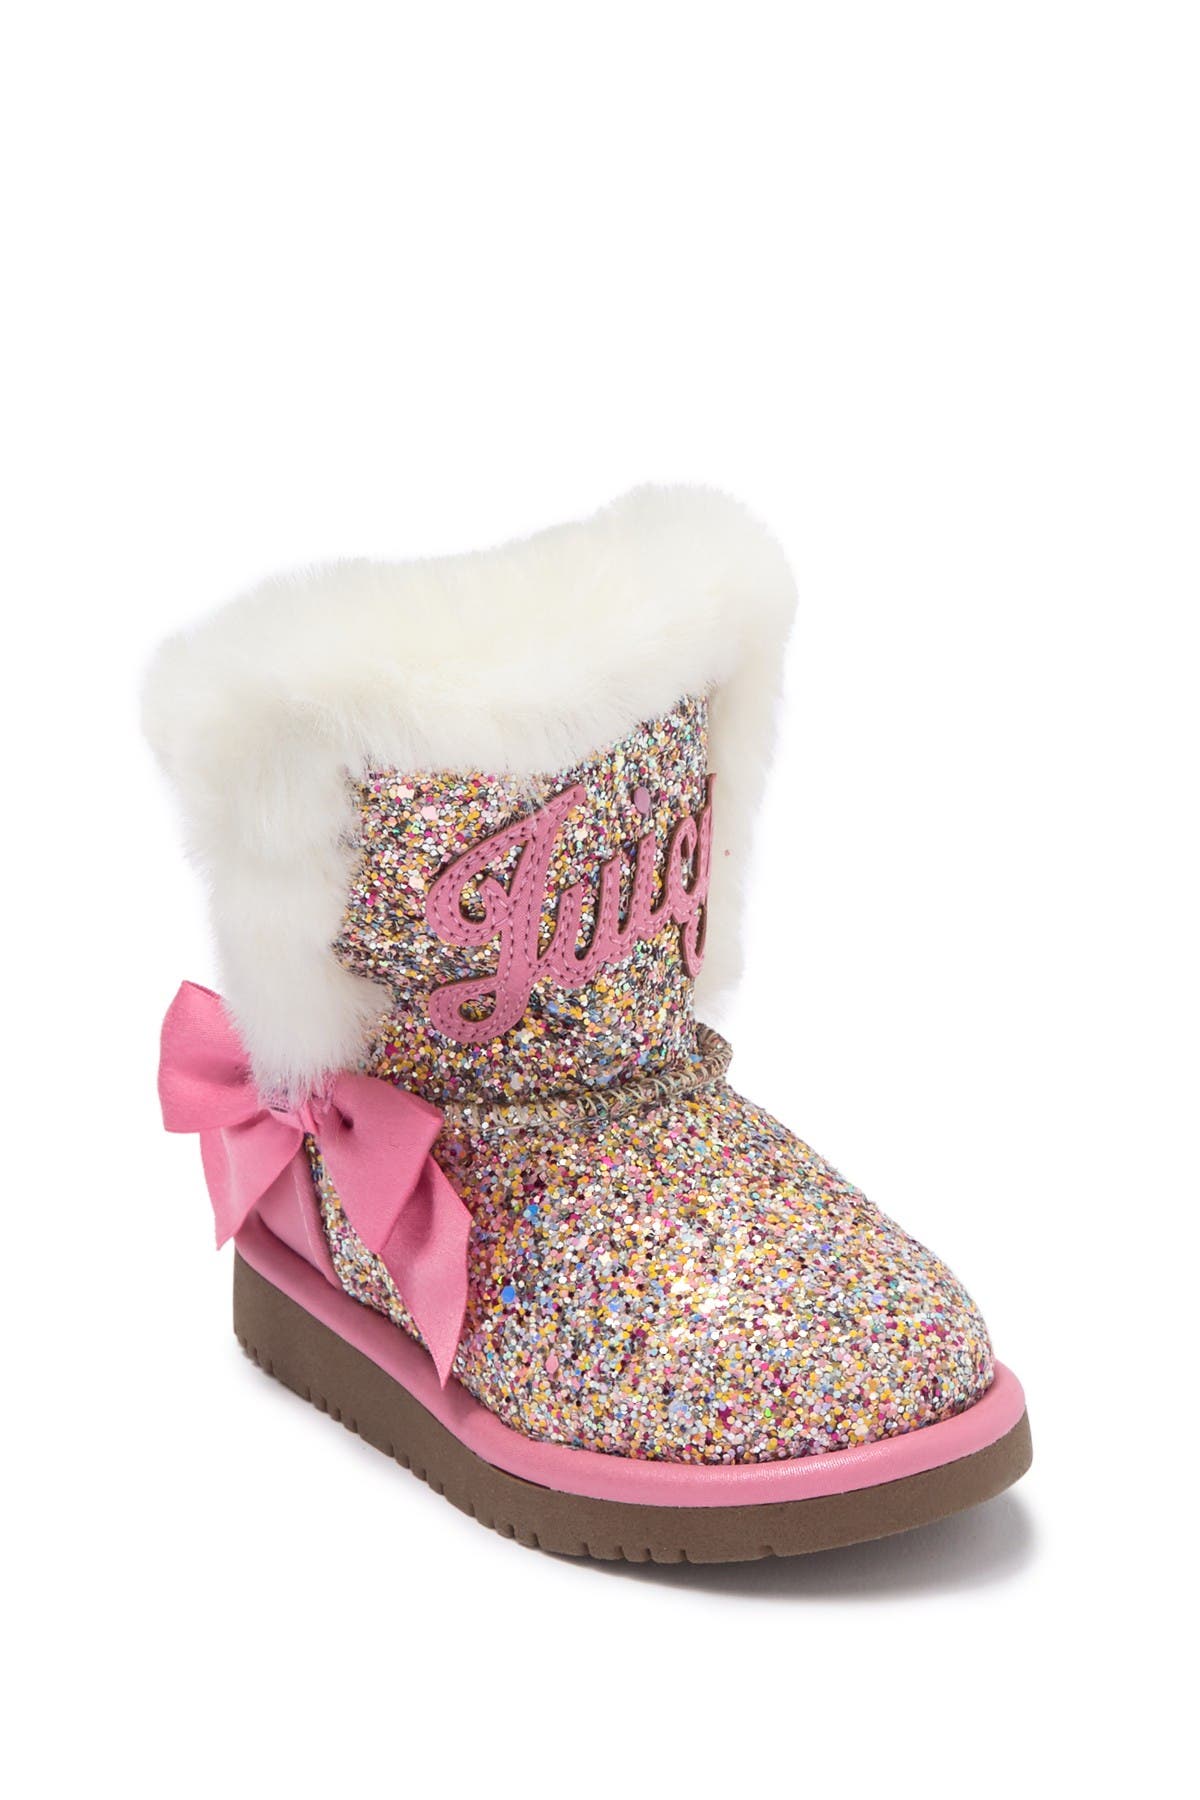 Juicy Couture | Faux Fur Trimmed Glitter Boot | Nordstrom Rack